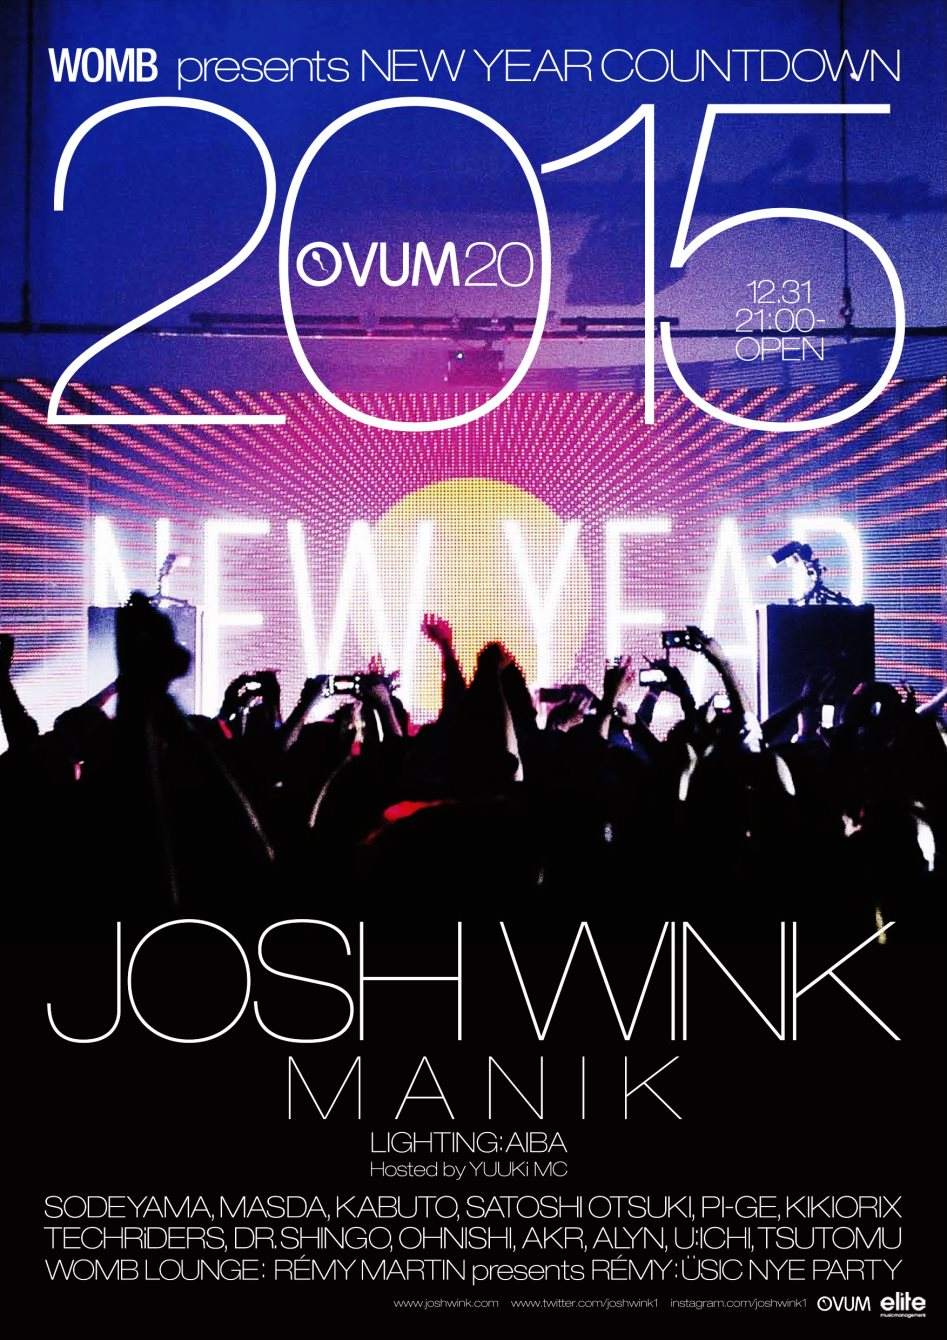 Womb presents New Year Countdown To 2015 - フライヤー裏